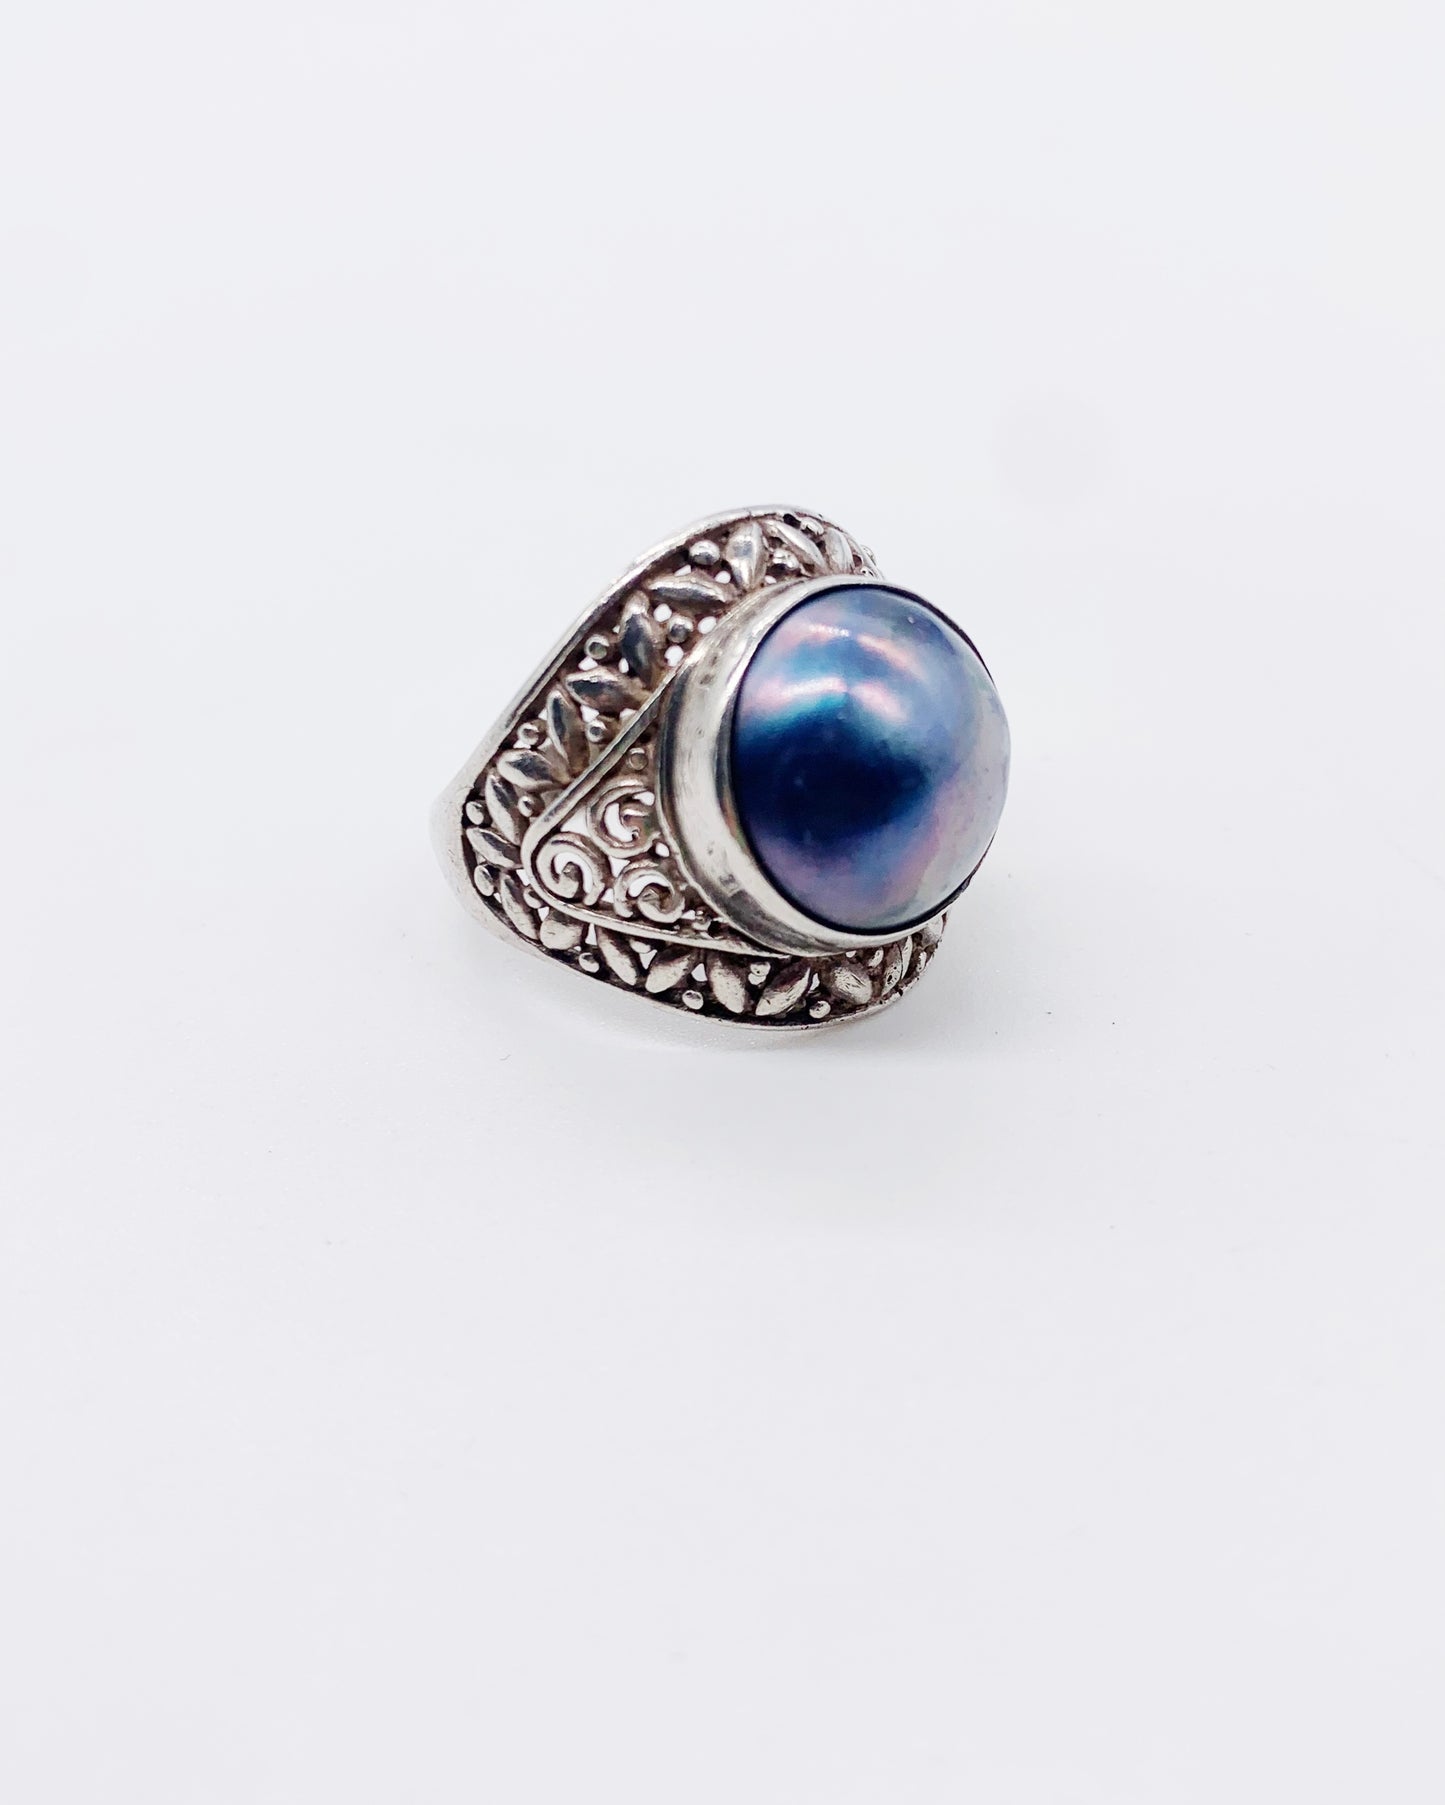 BLUE MABE PEARL RING